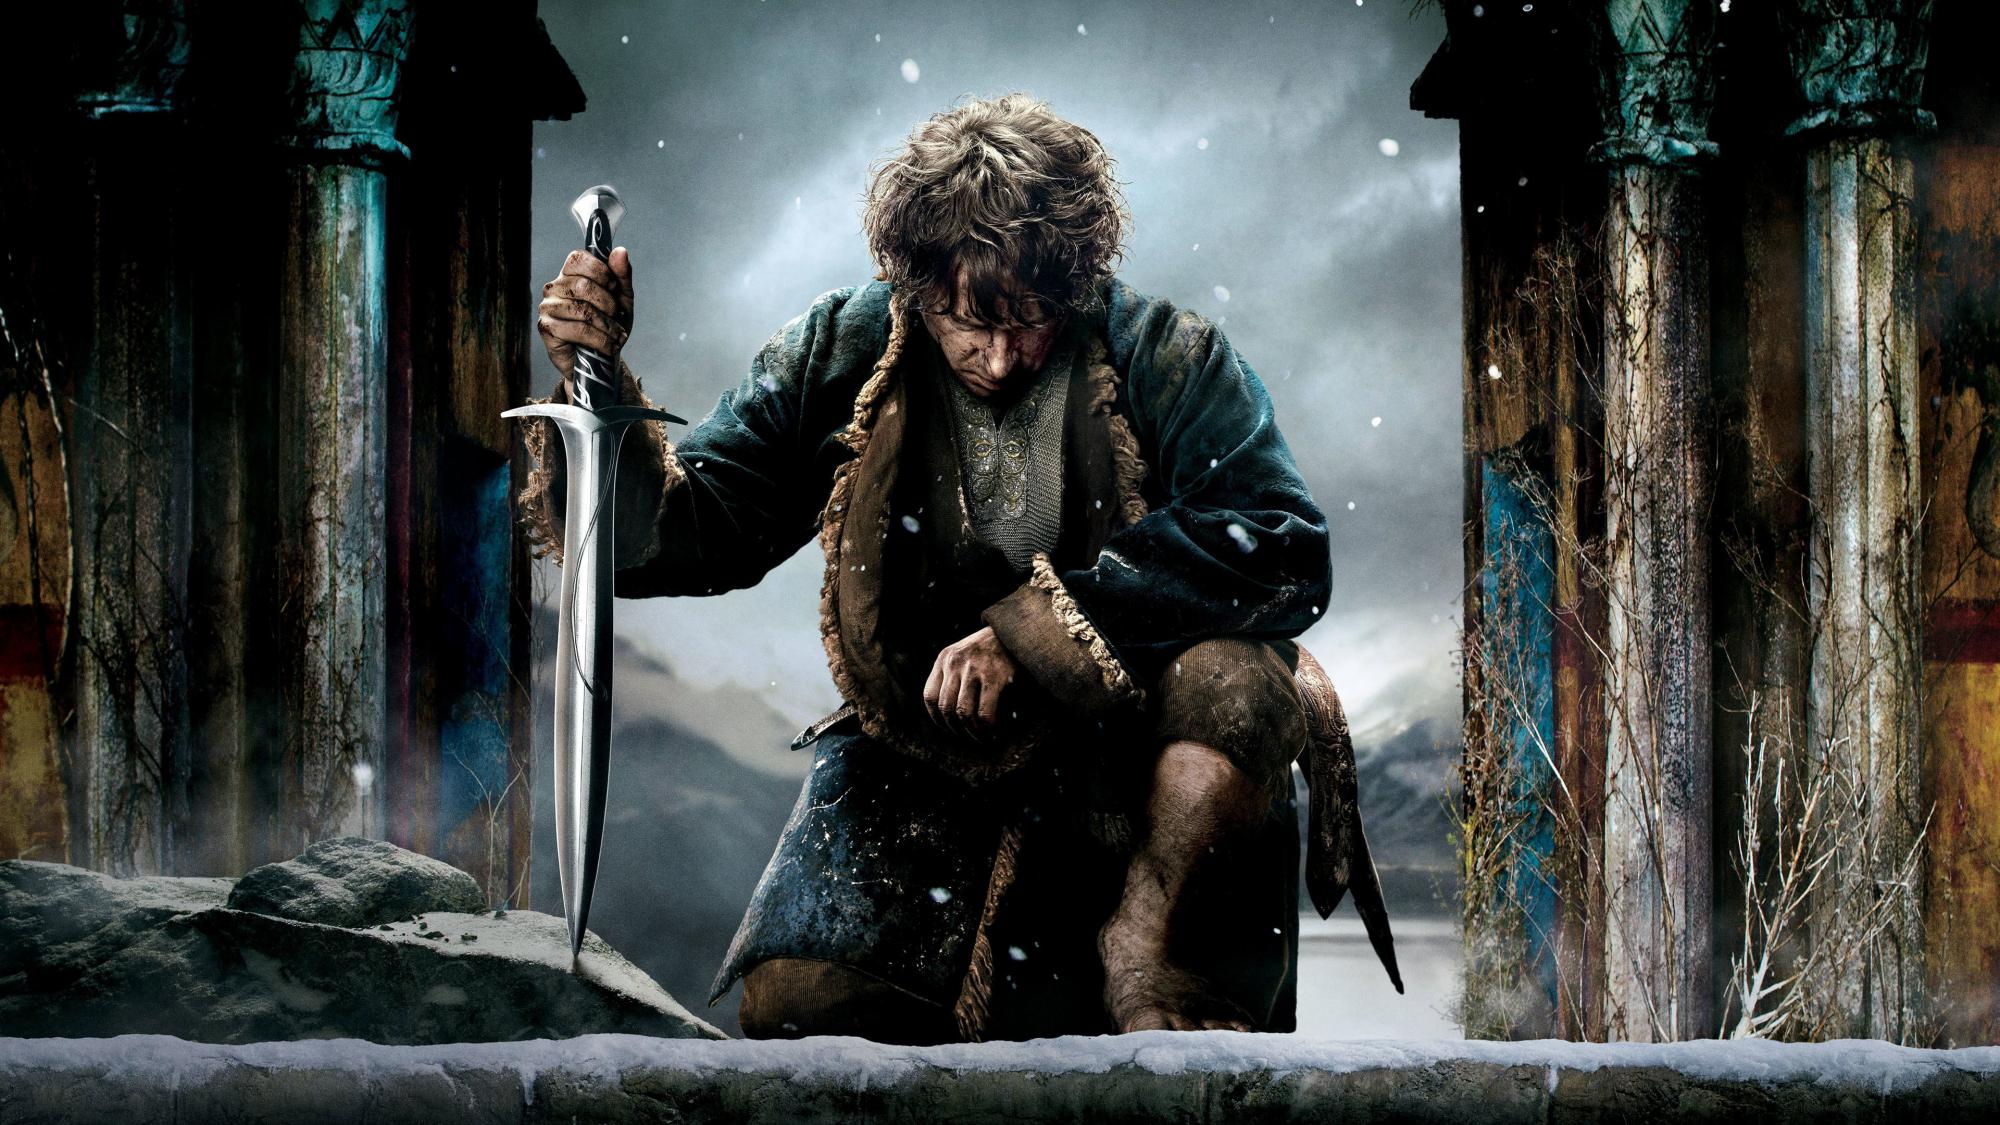 Backdrop Image for The Hobbit: The Battle of the Five Armies